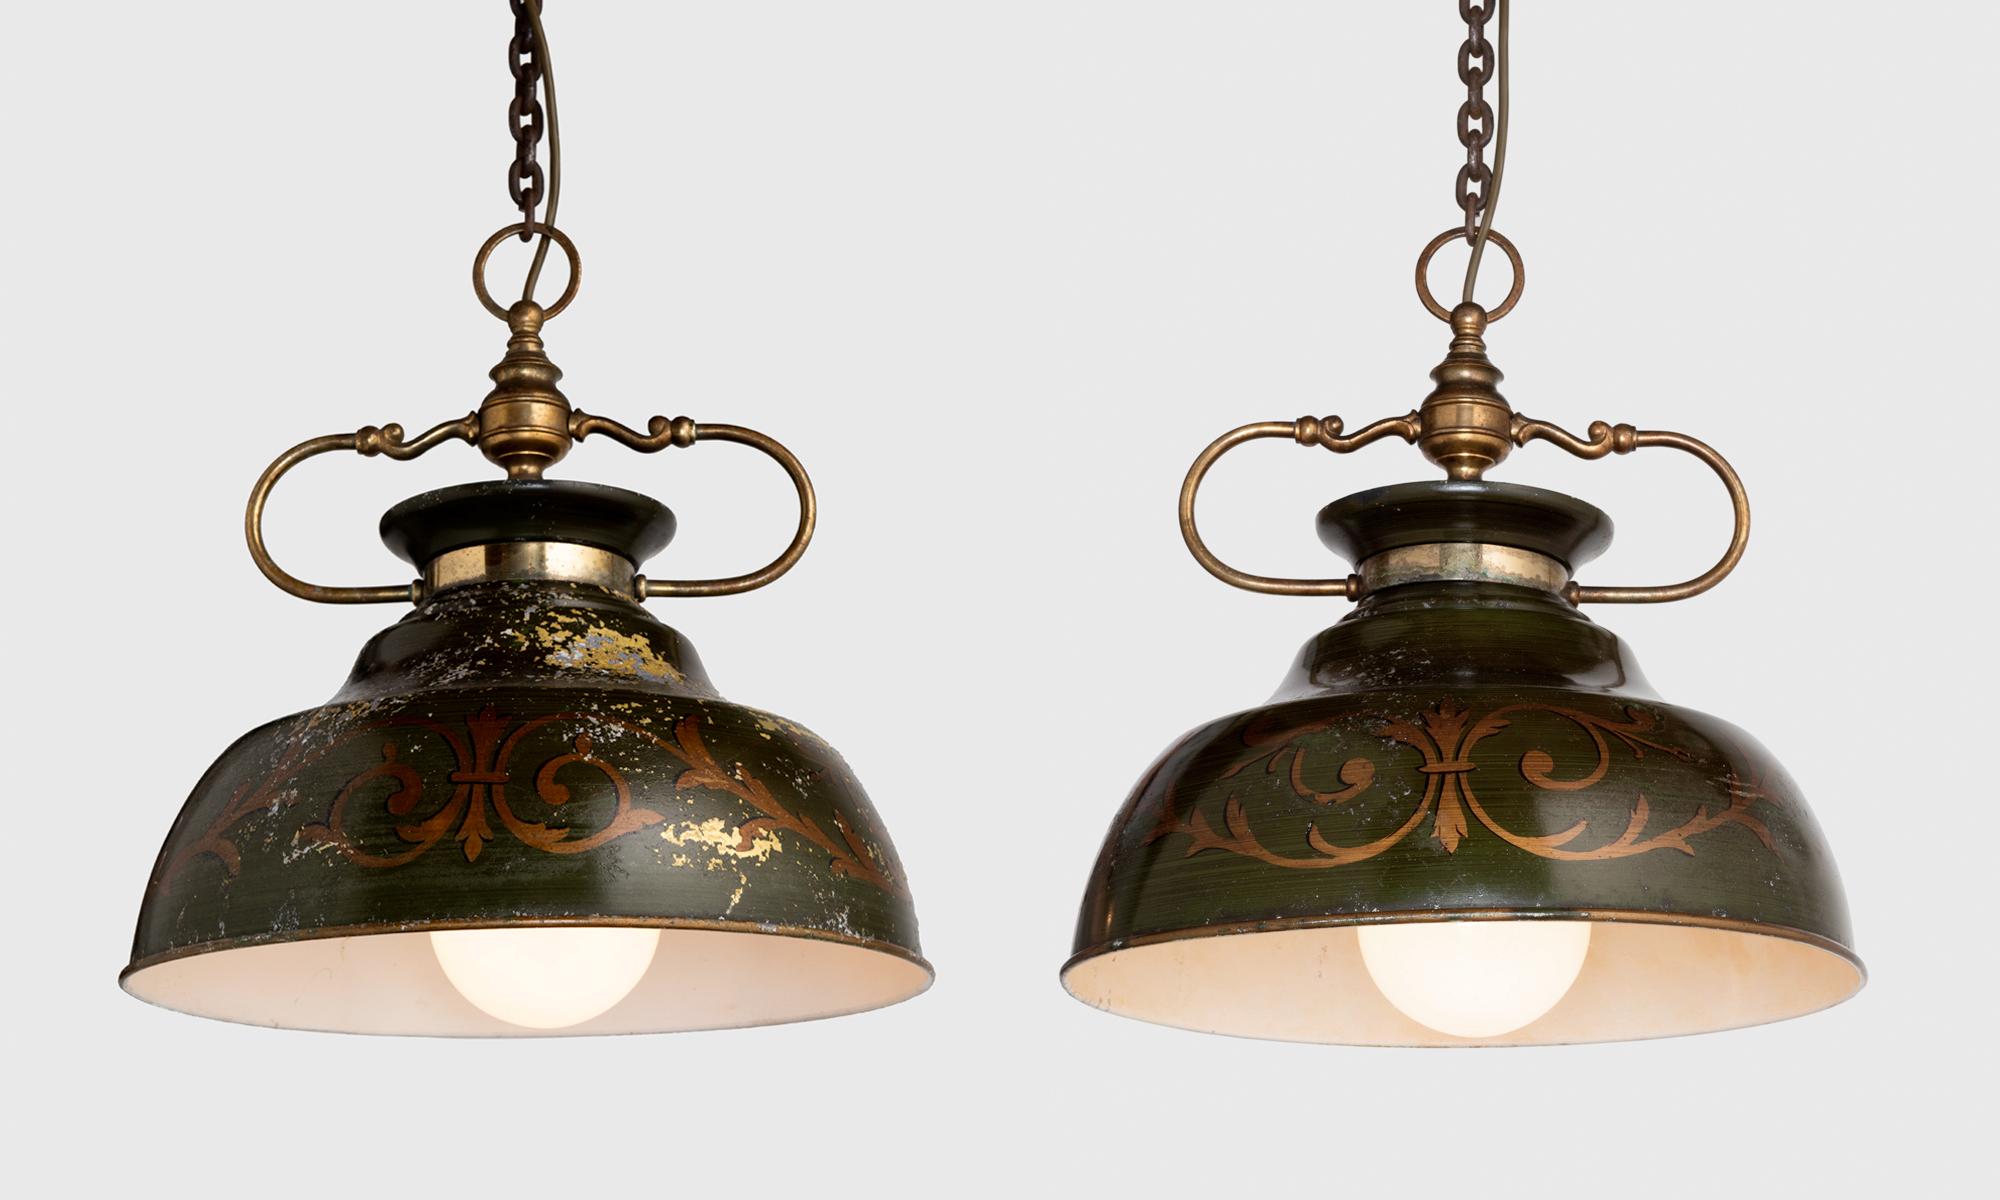 Hand Painted Tole Pendants, France, circa 1910

Ornate detailing in green and gold paint on metal shades with brass hardware. One of the four pendants is heavily patinated, differing from the other three.